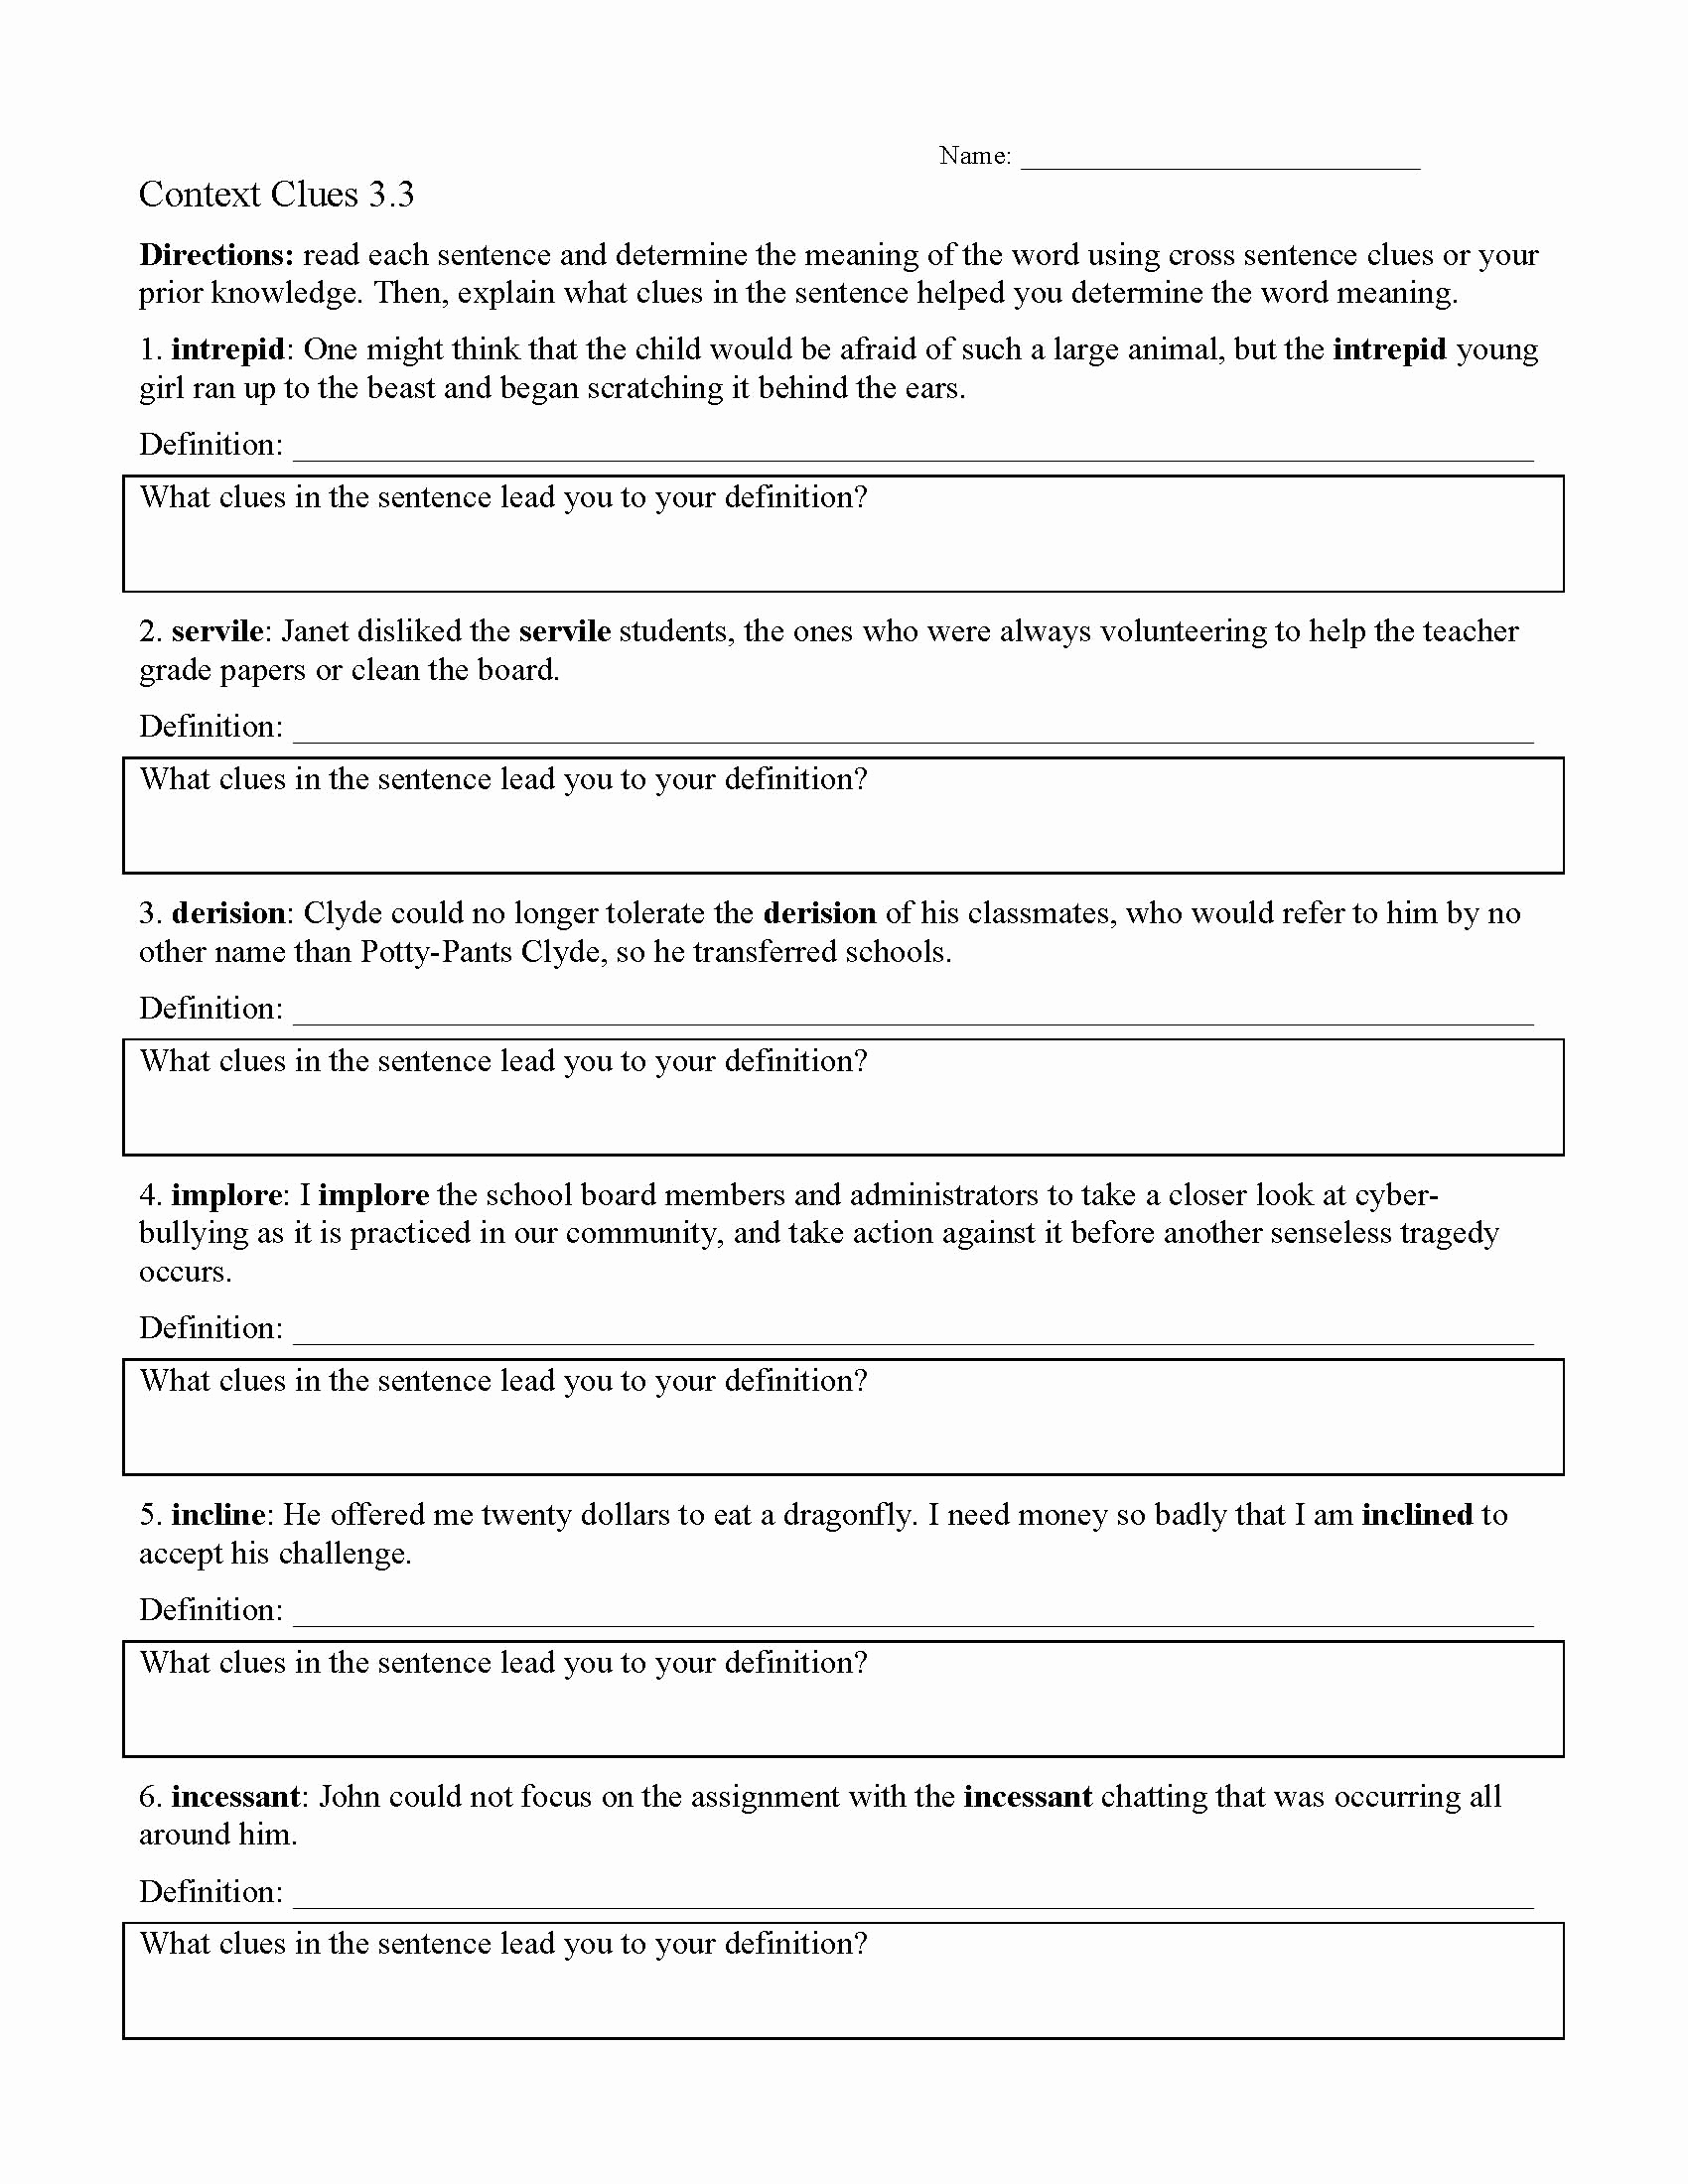 Context Clues 5th Grade Worksheets Lovely Context Clues Worksheets 5th Grade Multiple Choice